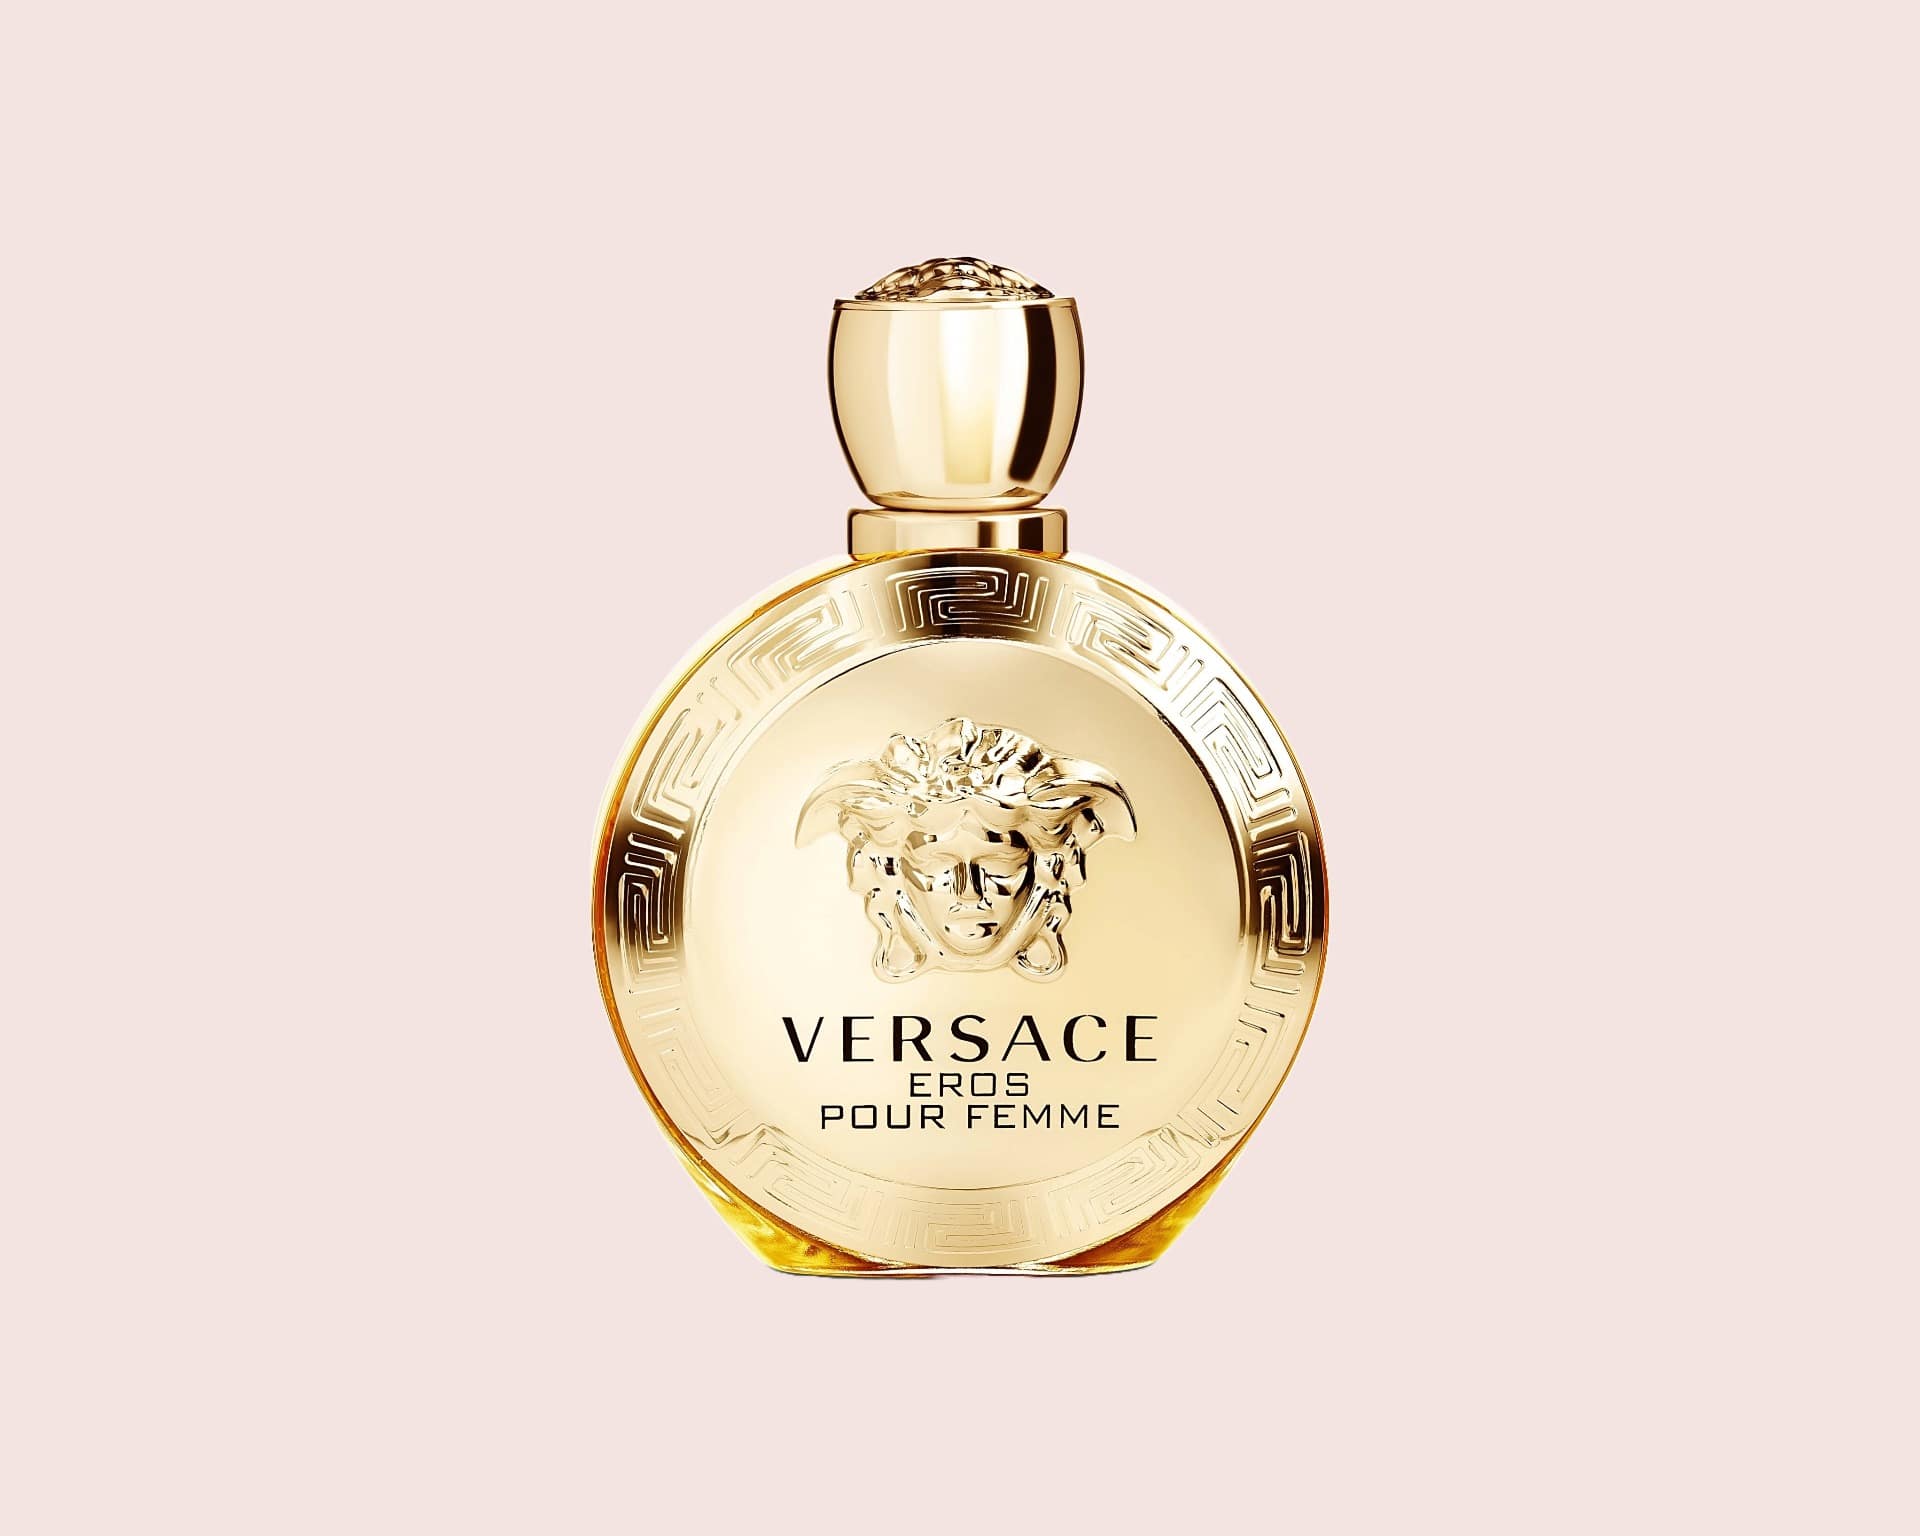 Perfume For Women - Store - Best Prices - Buy at EDGARS